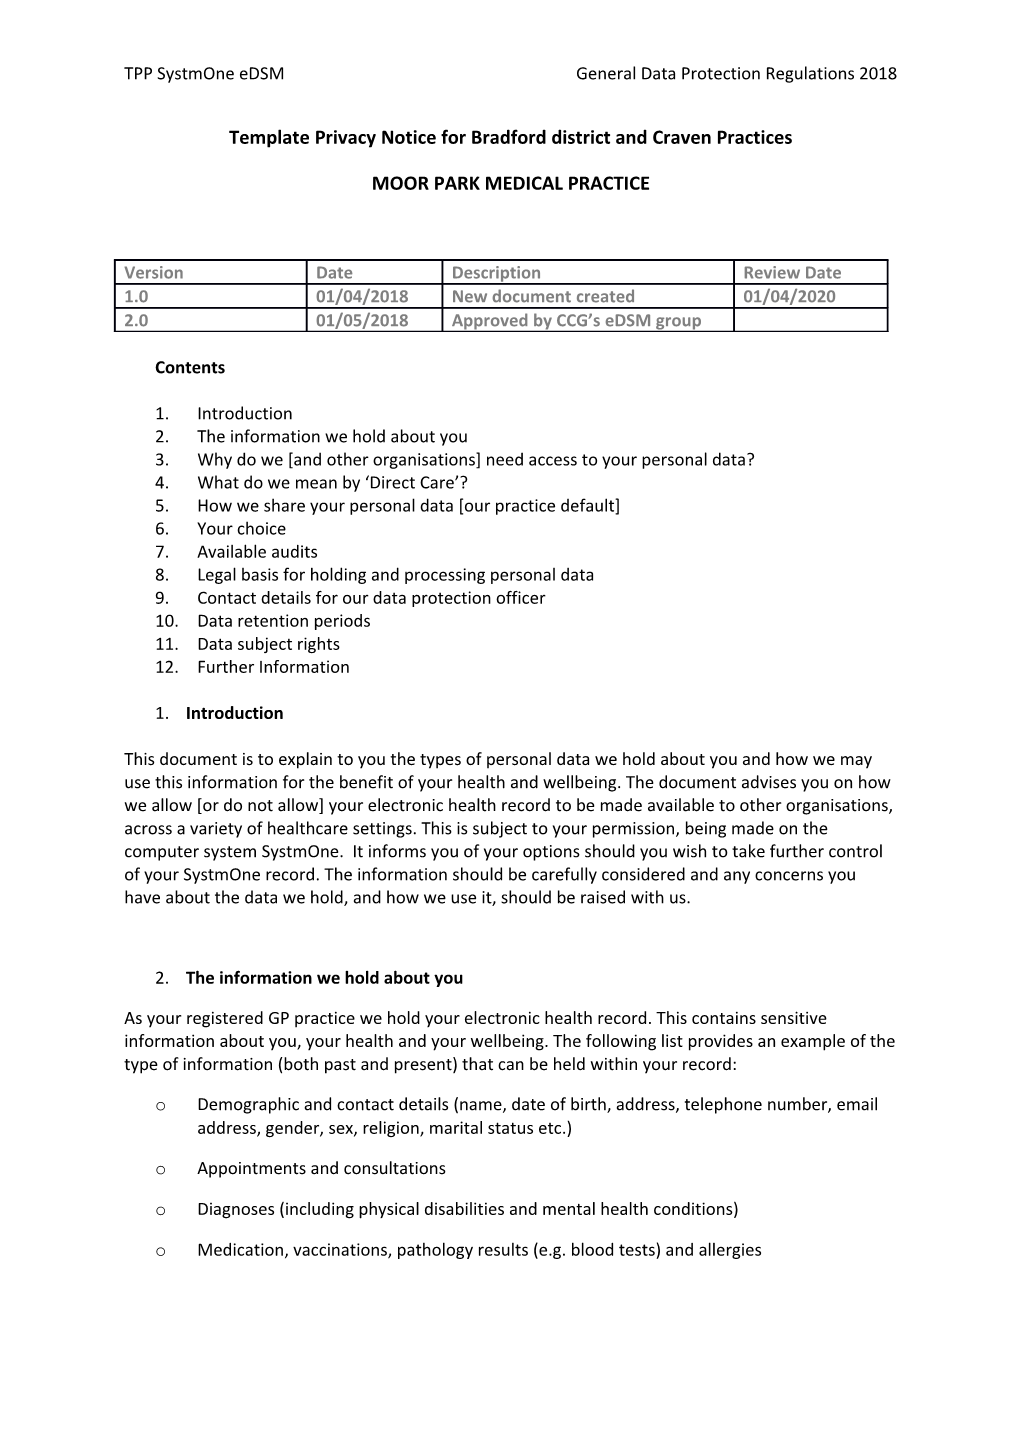 Template Privacynotice for Bradford District and Craven Practices